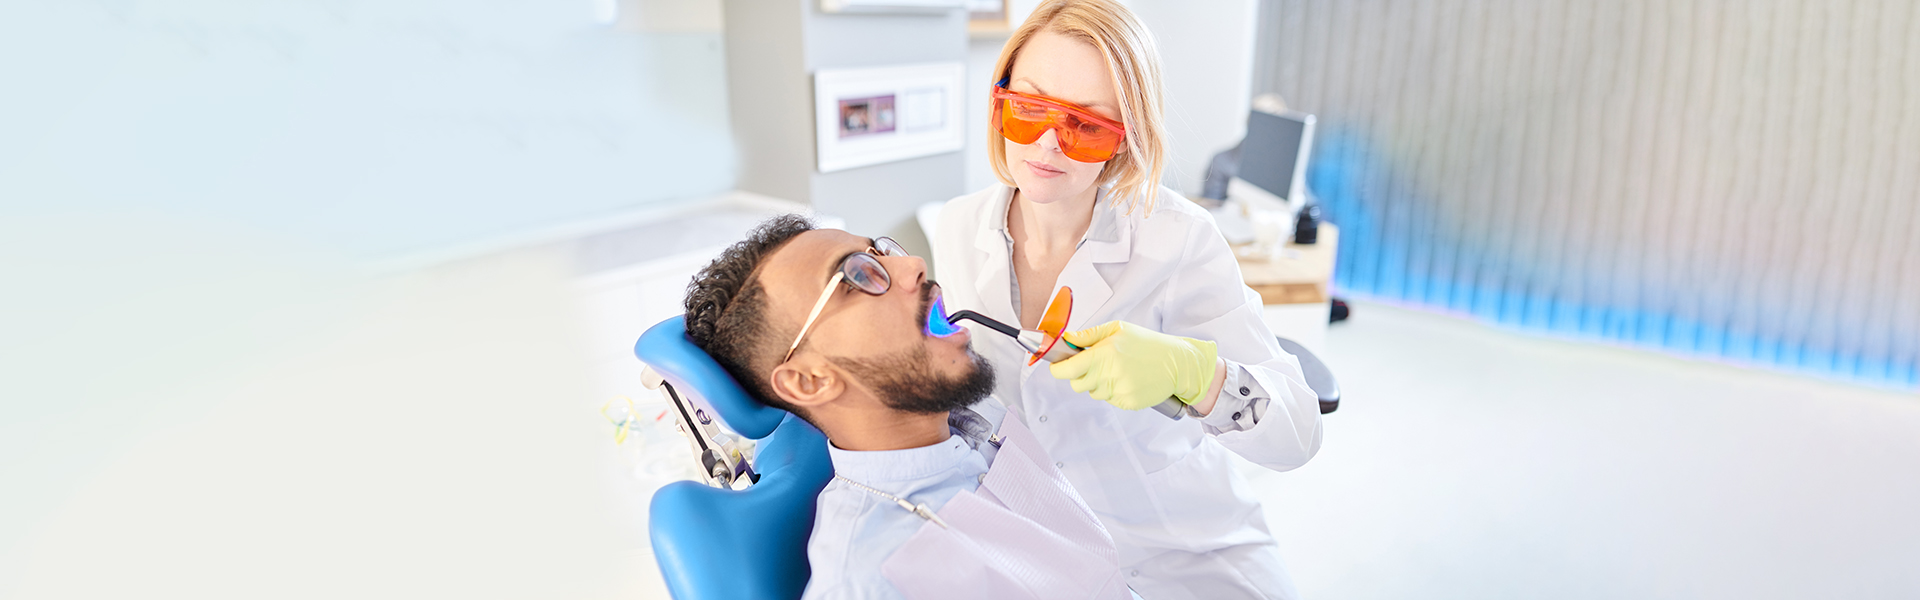 Laser Dentistry : Procedures, Types and Benefits